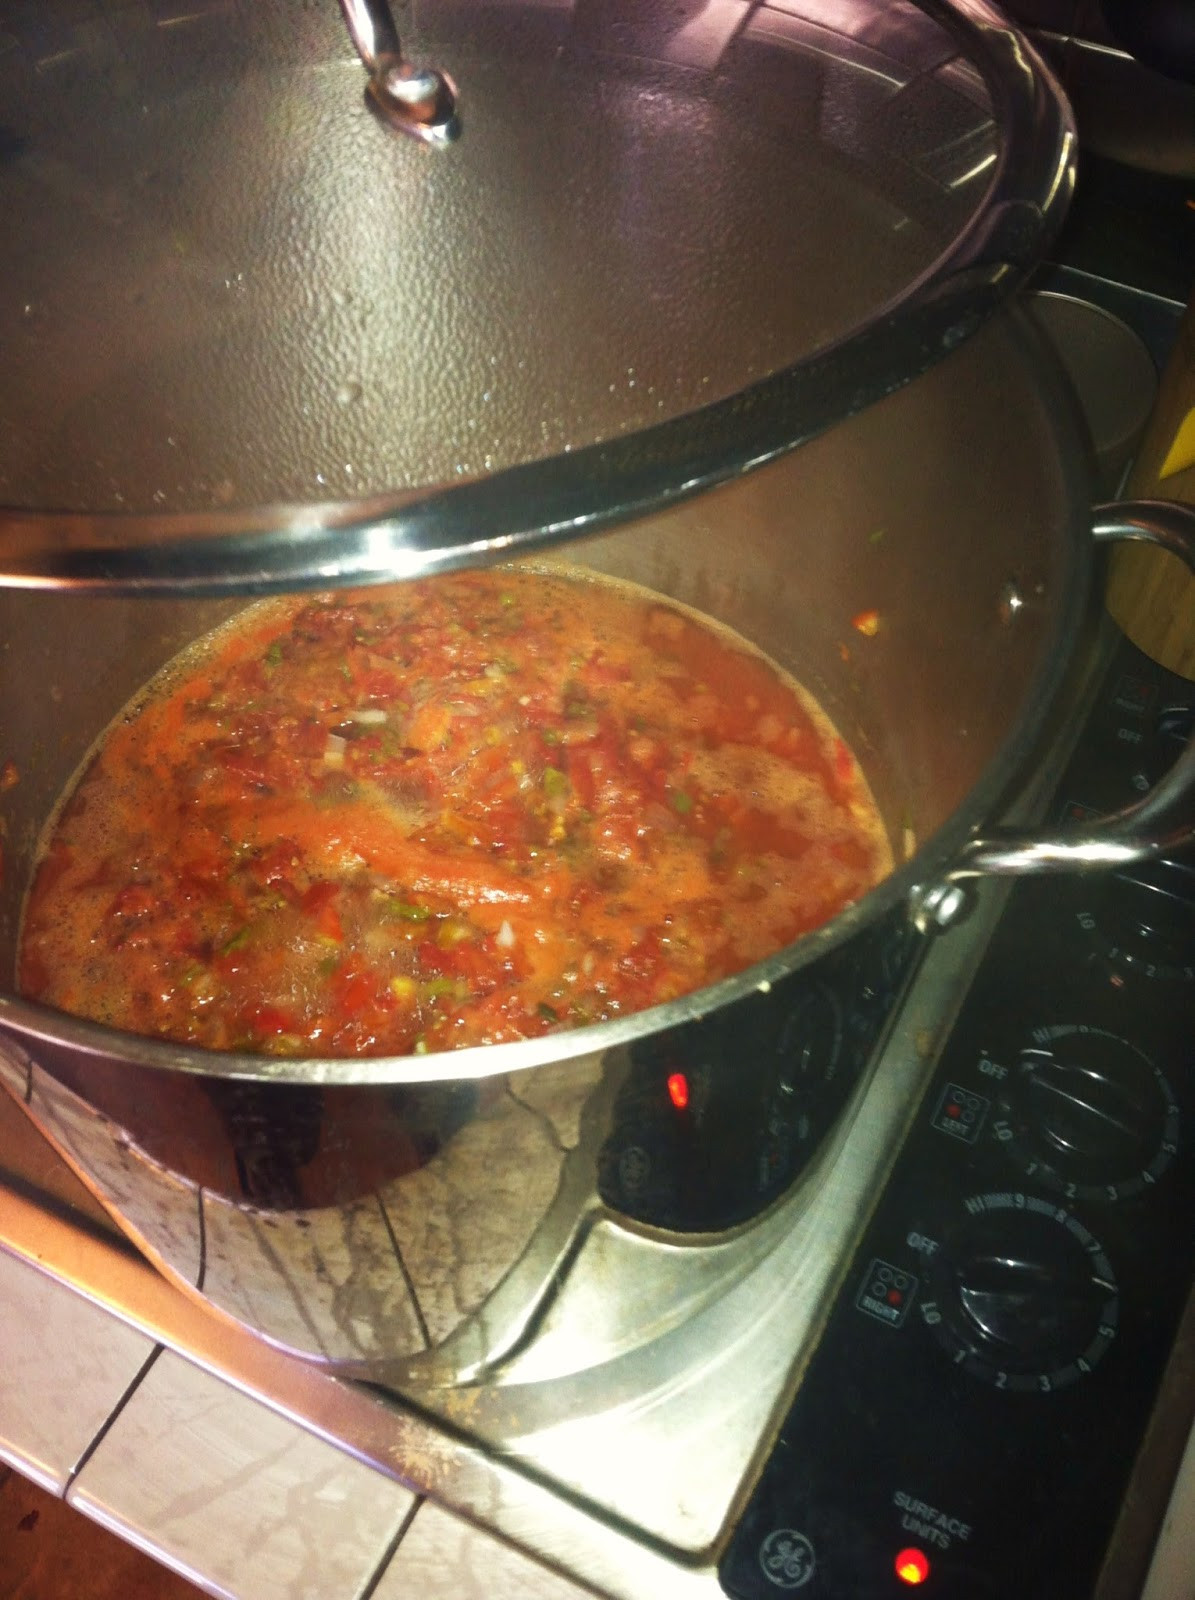 Hot Salsa Recipe For Canning
 Chelsea Welsea mits New SPICY Salsa Recipe For Canning